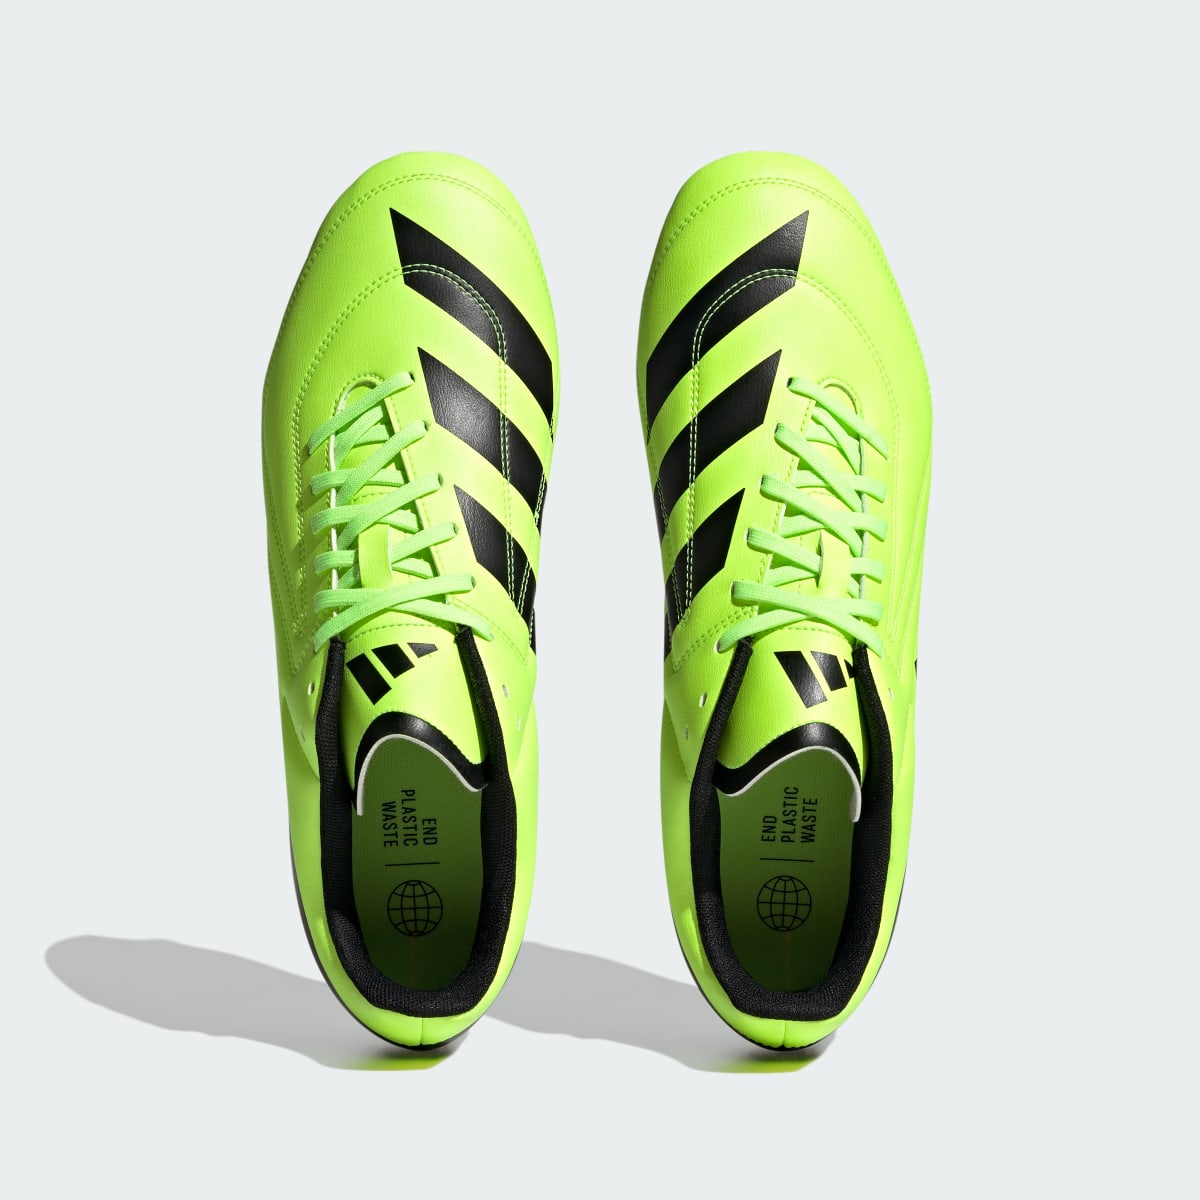 Adidas RS15 Soft Ground Rugby Boots. 6